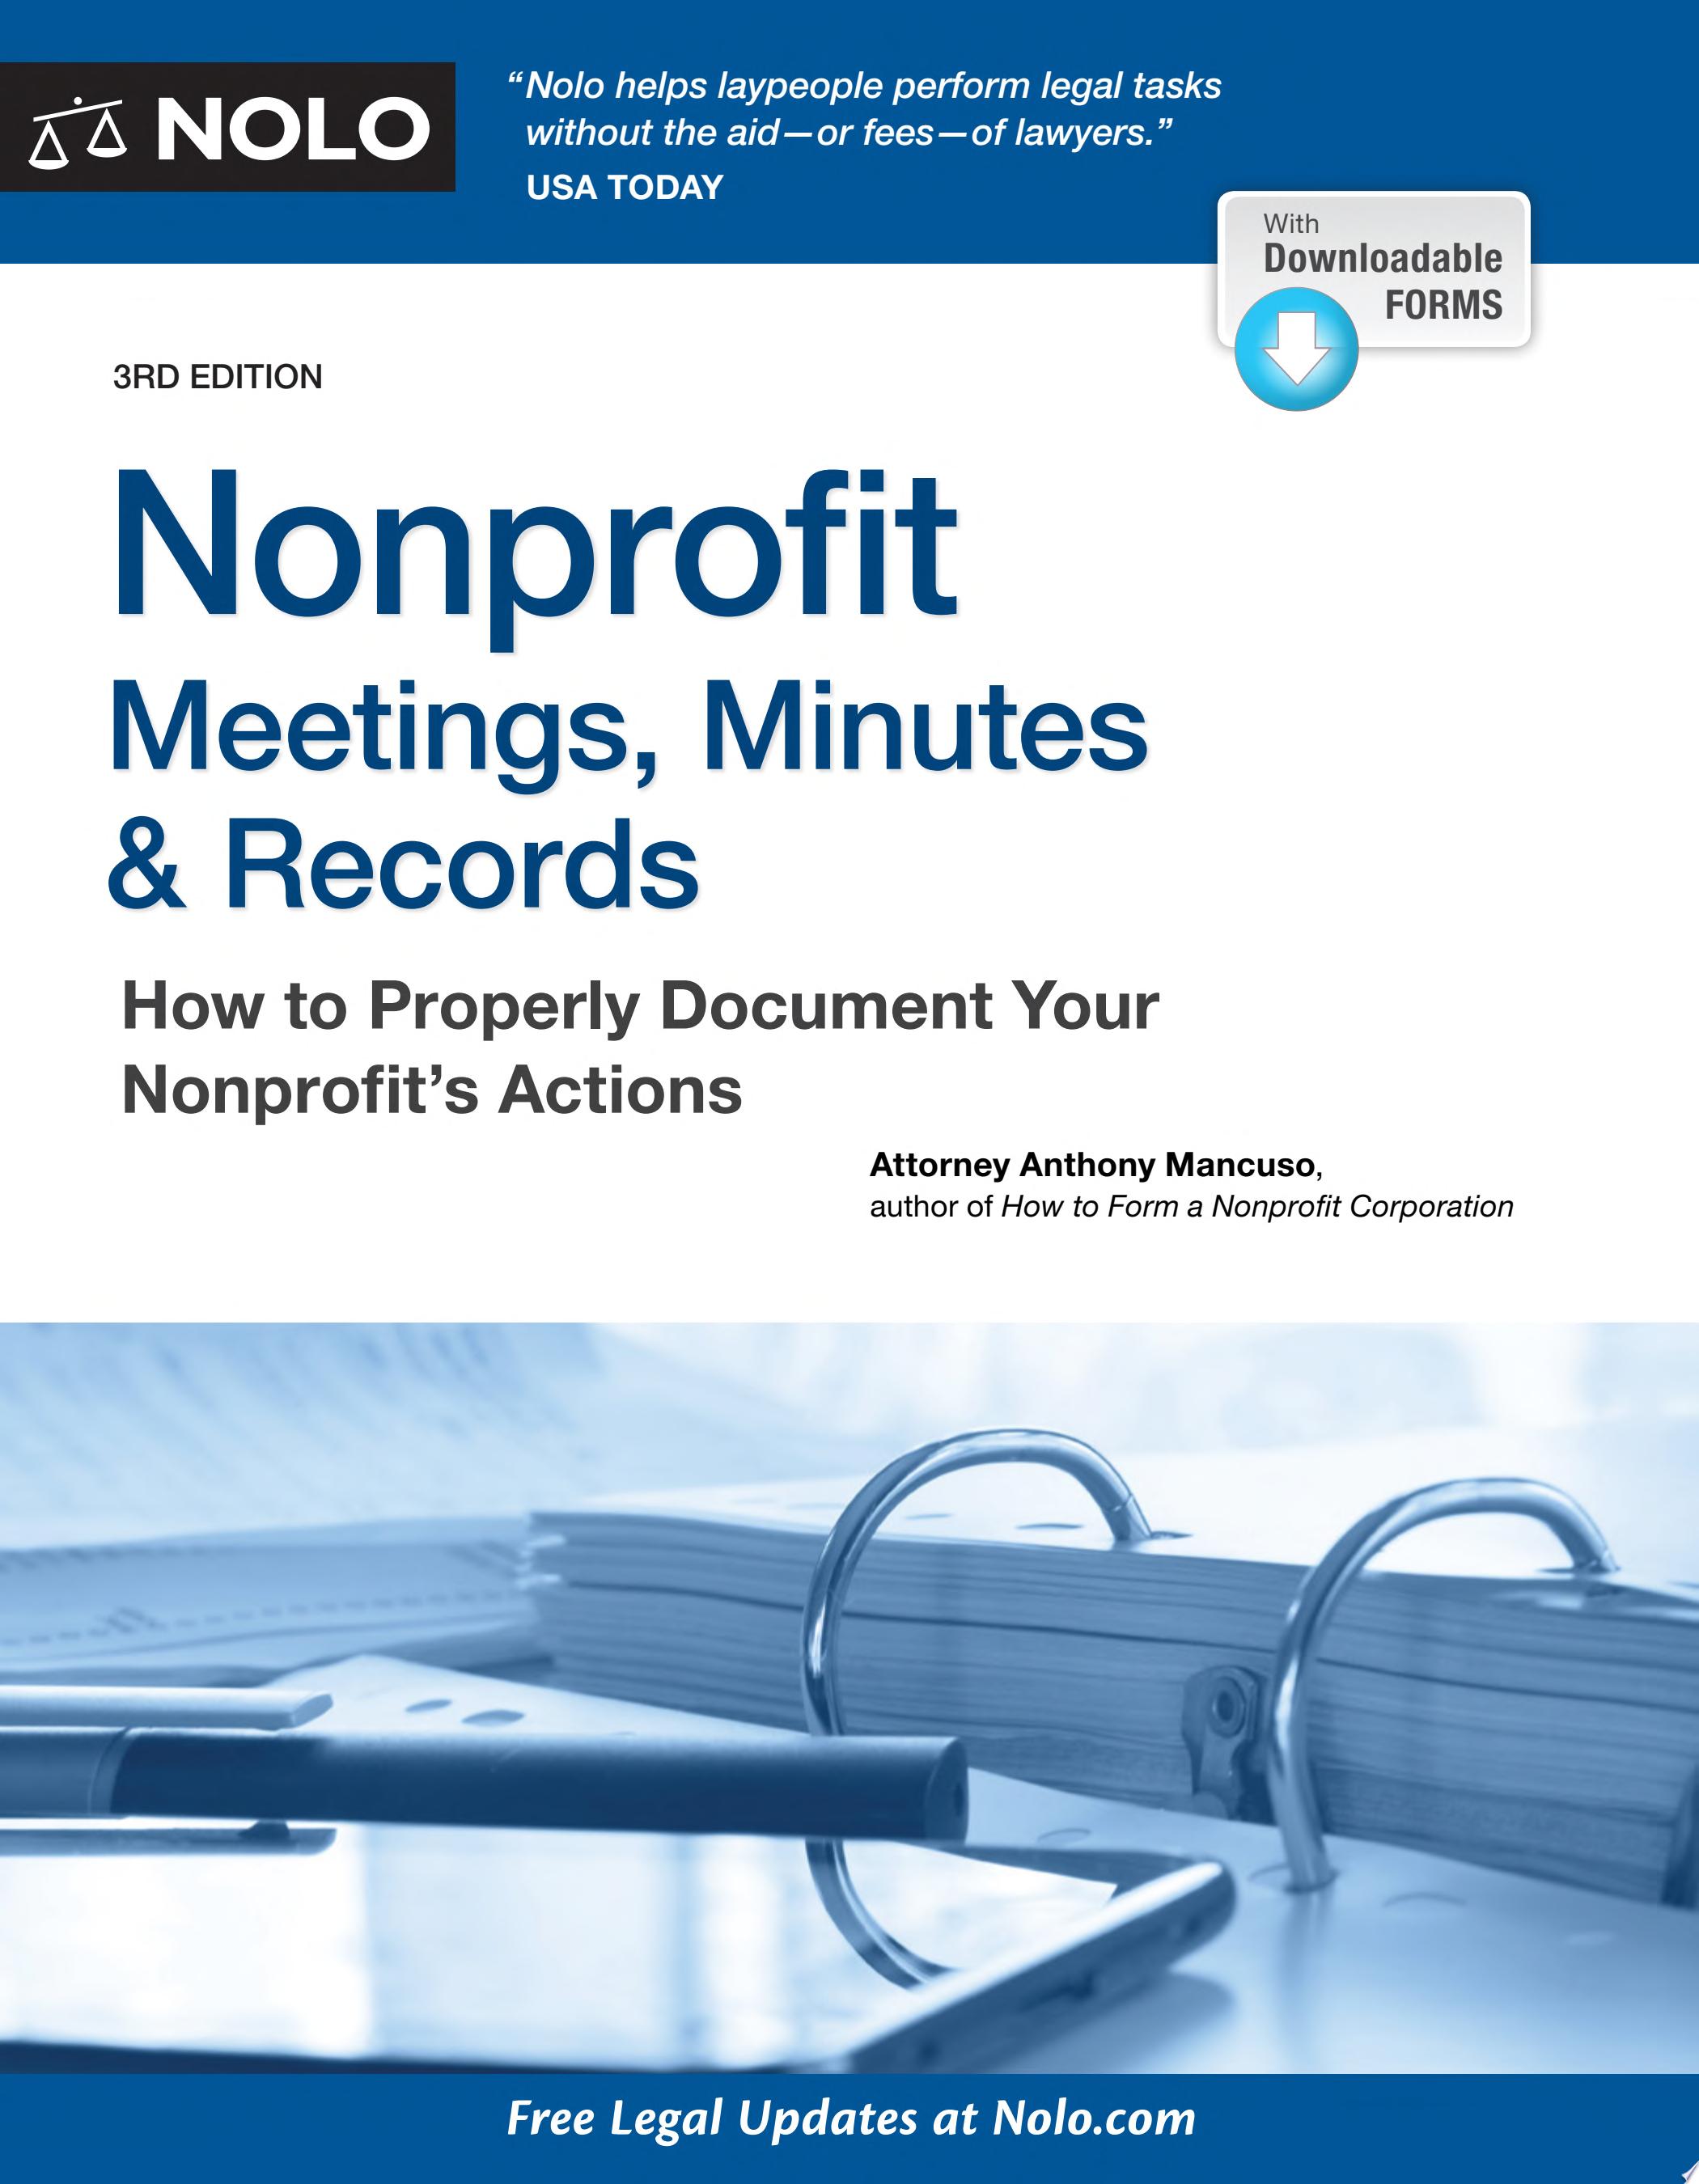 Image for "Nonprofit Meetings, Minutes &amp; Records"